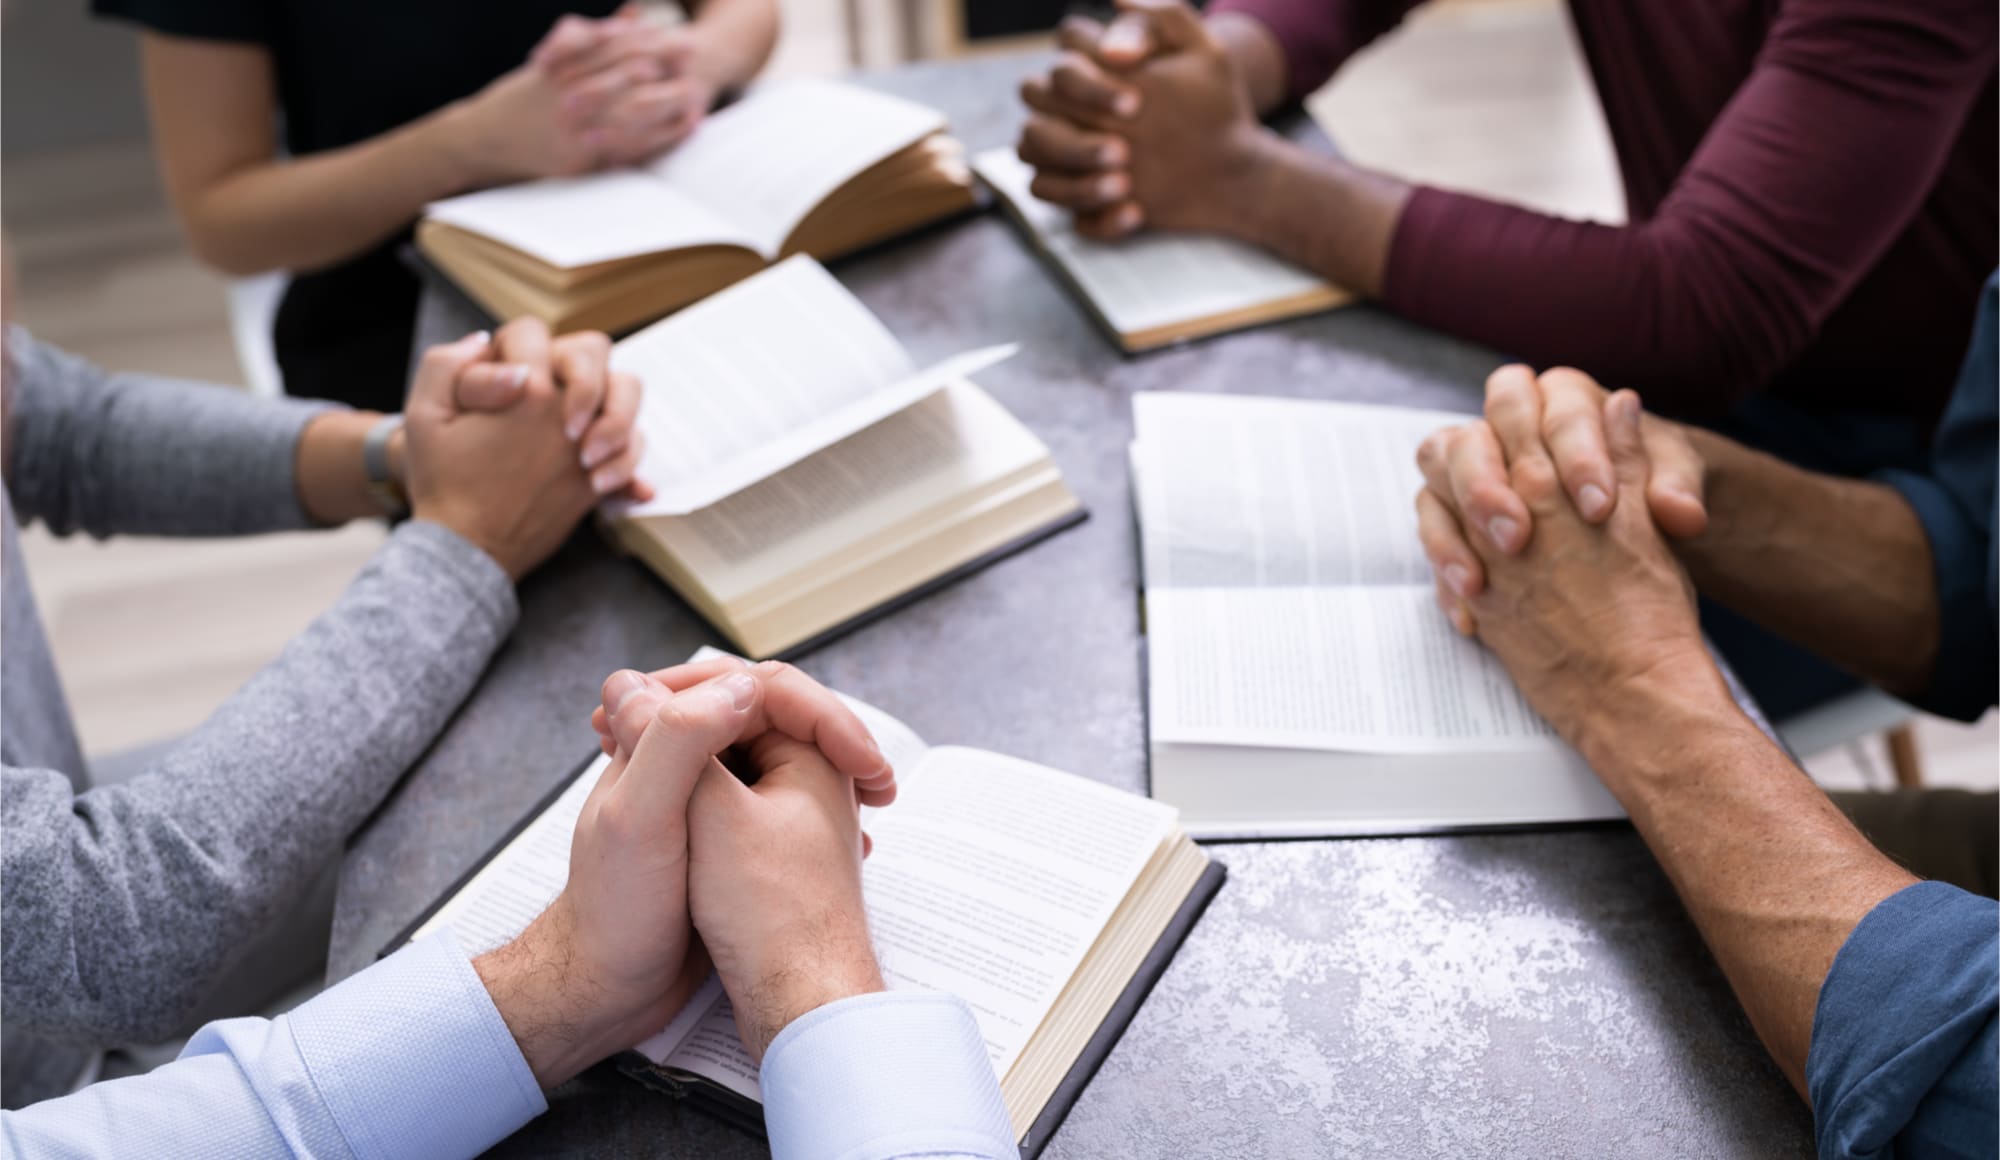 Faith-Based Addiction Treatment Pathfinders - The hands of a group of people who are in prayer during their faith based addiction treatment.